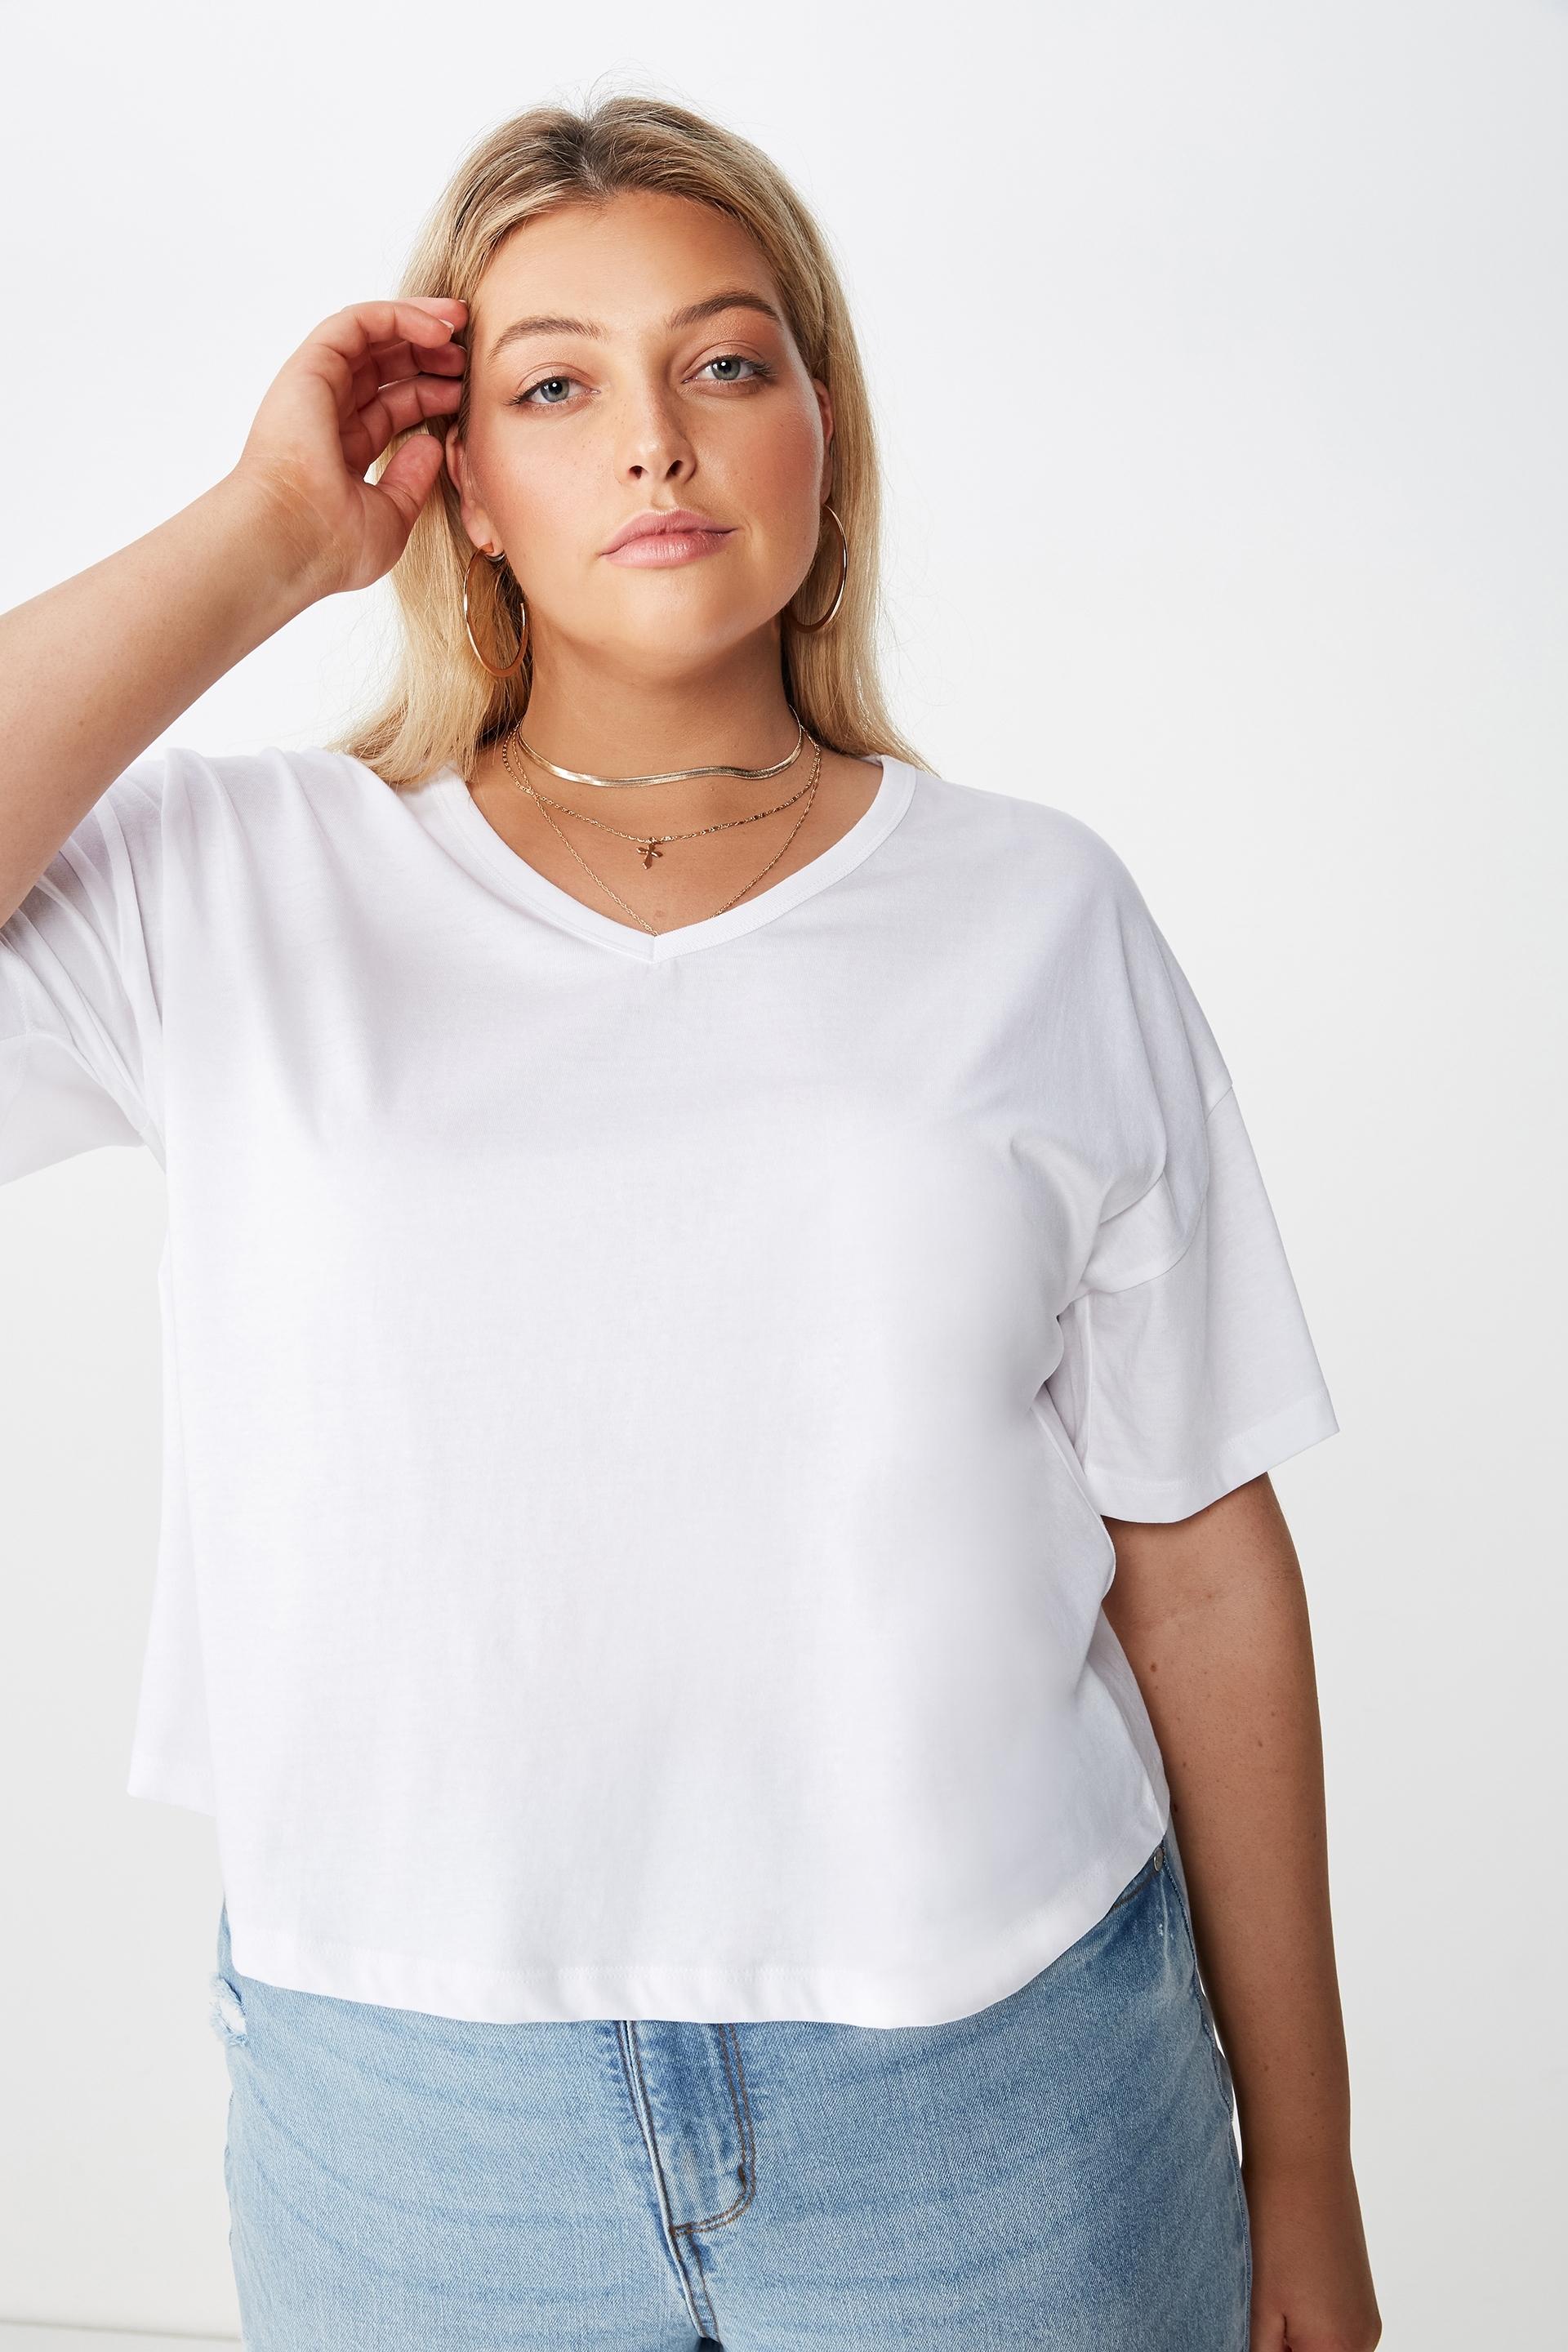 Curve relaxed v neck tee - white Cotton On Tops | Superbalist.com